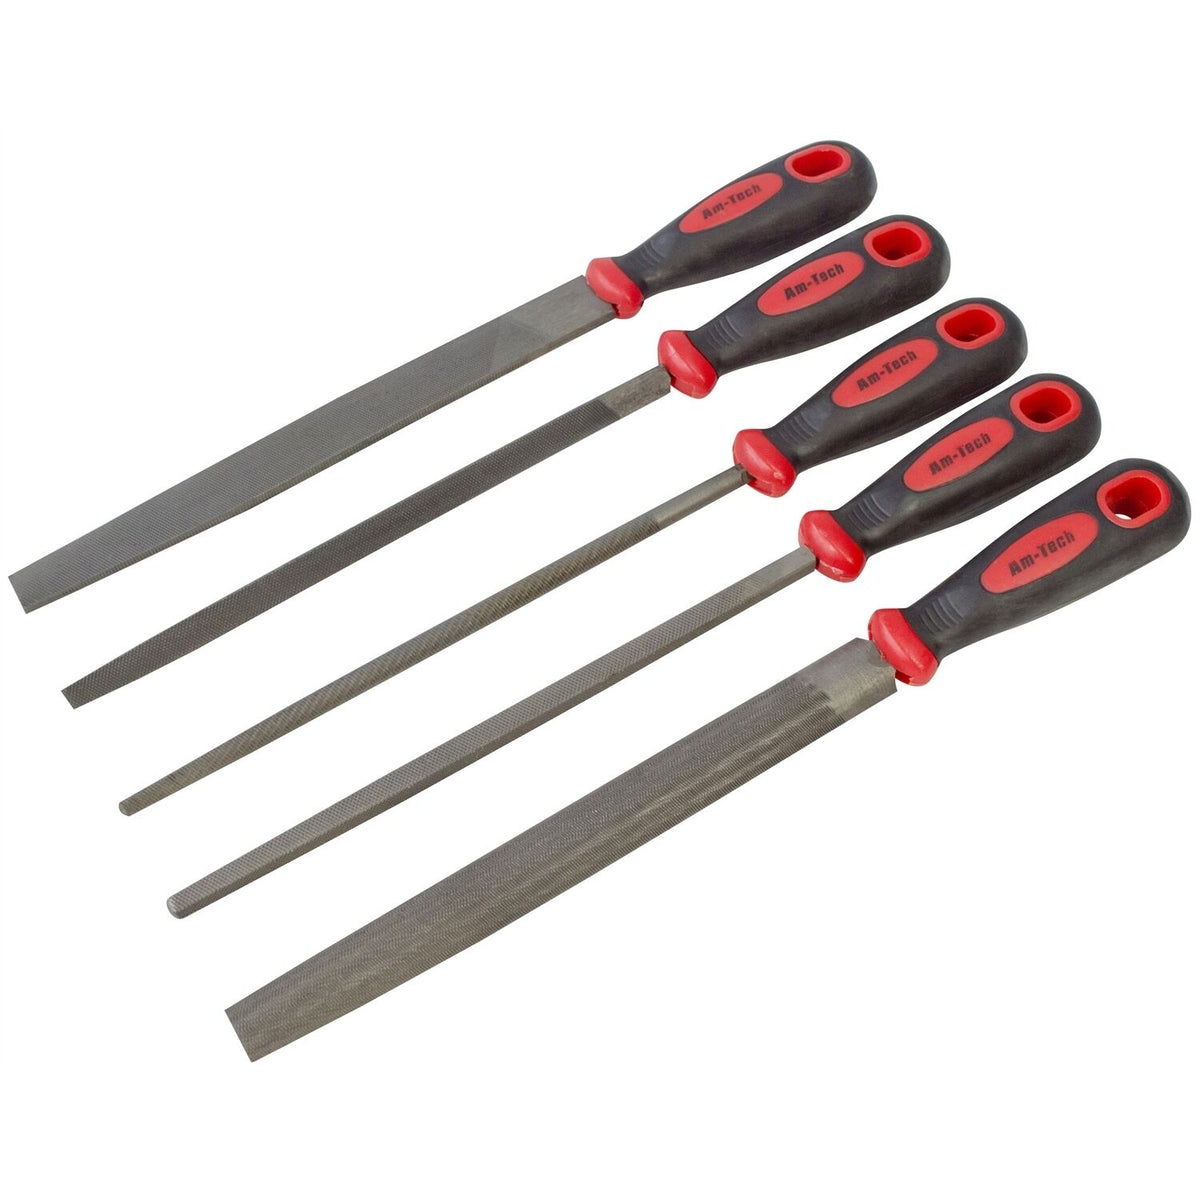 5pc 8" 200mm Soft Grip Assorted Engineer Metal File Set Heavy Duty